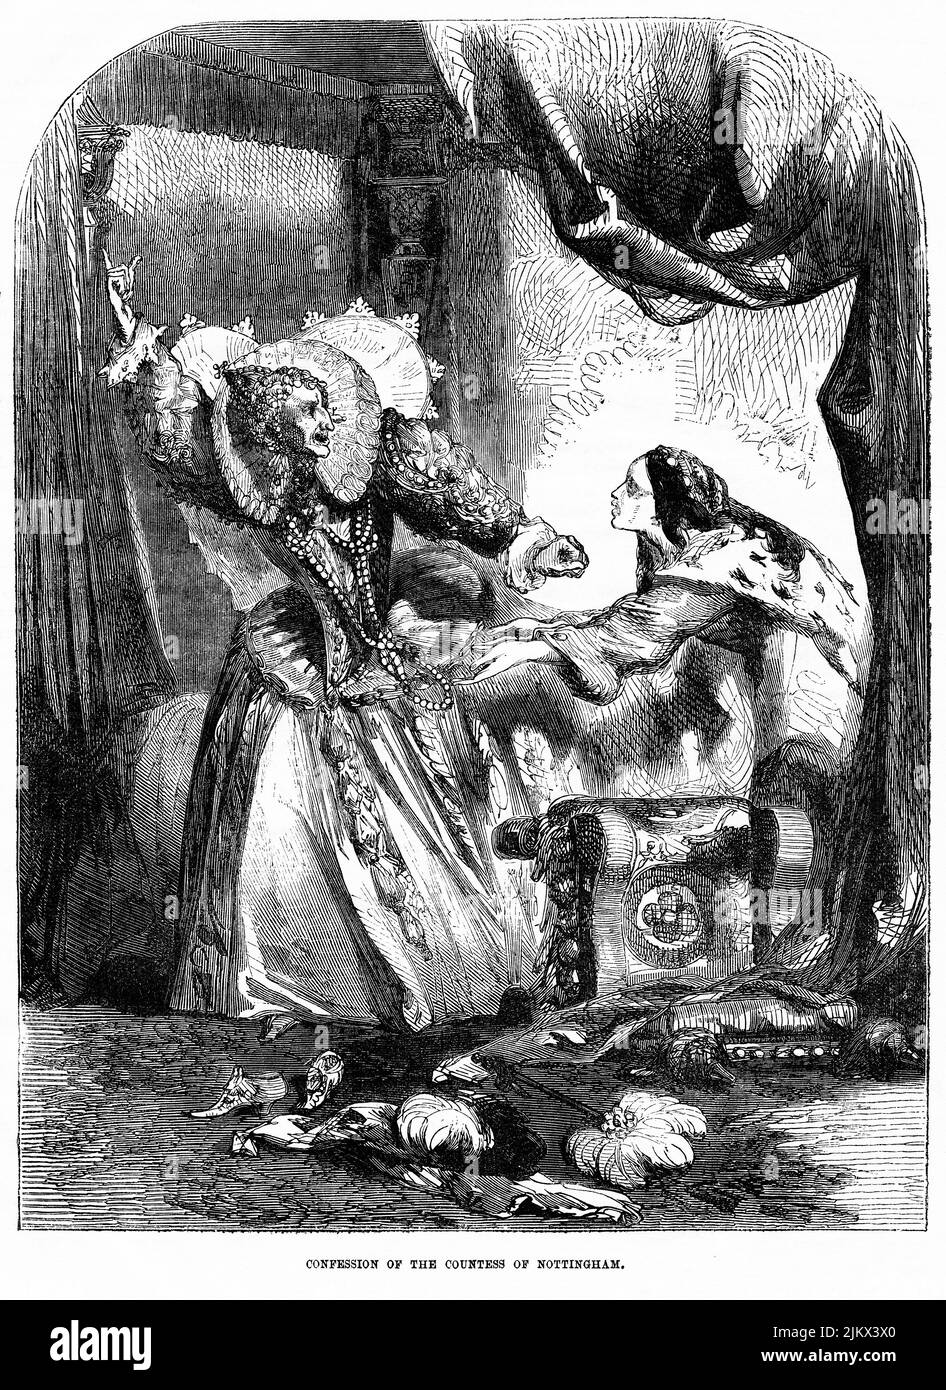 Confession of the Countess of Nottingham, Illustration from the Book, 'John Cassel’s Illustrated History of England, Volume II', text by William Howitt, Cassell, Petter, and Galpin, London, 1858 Stock Photo